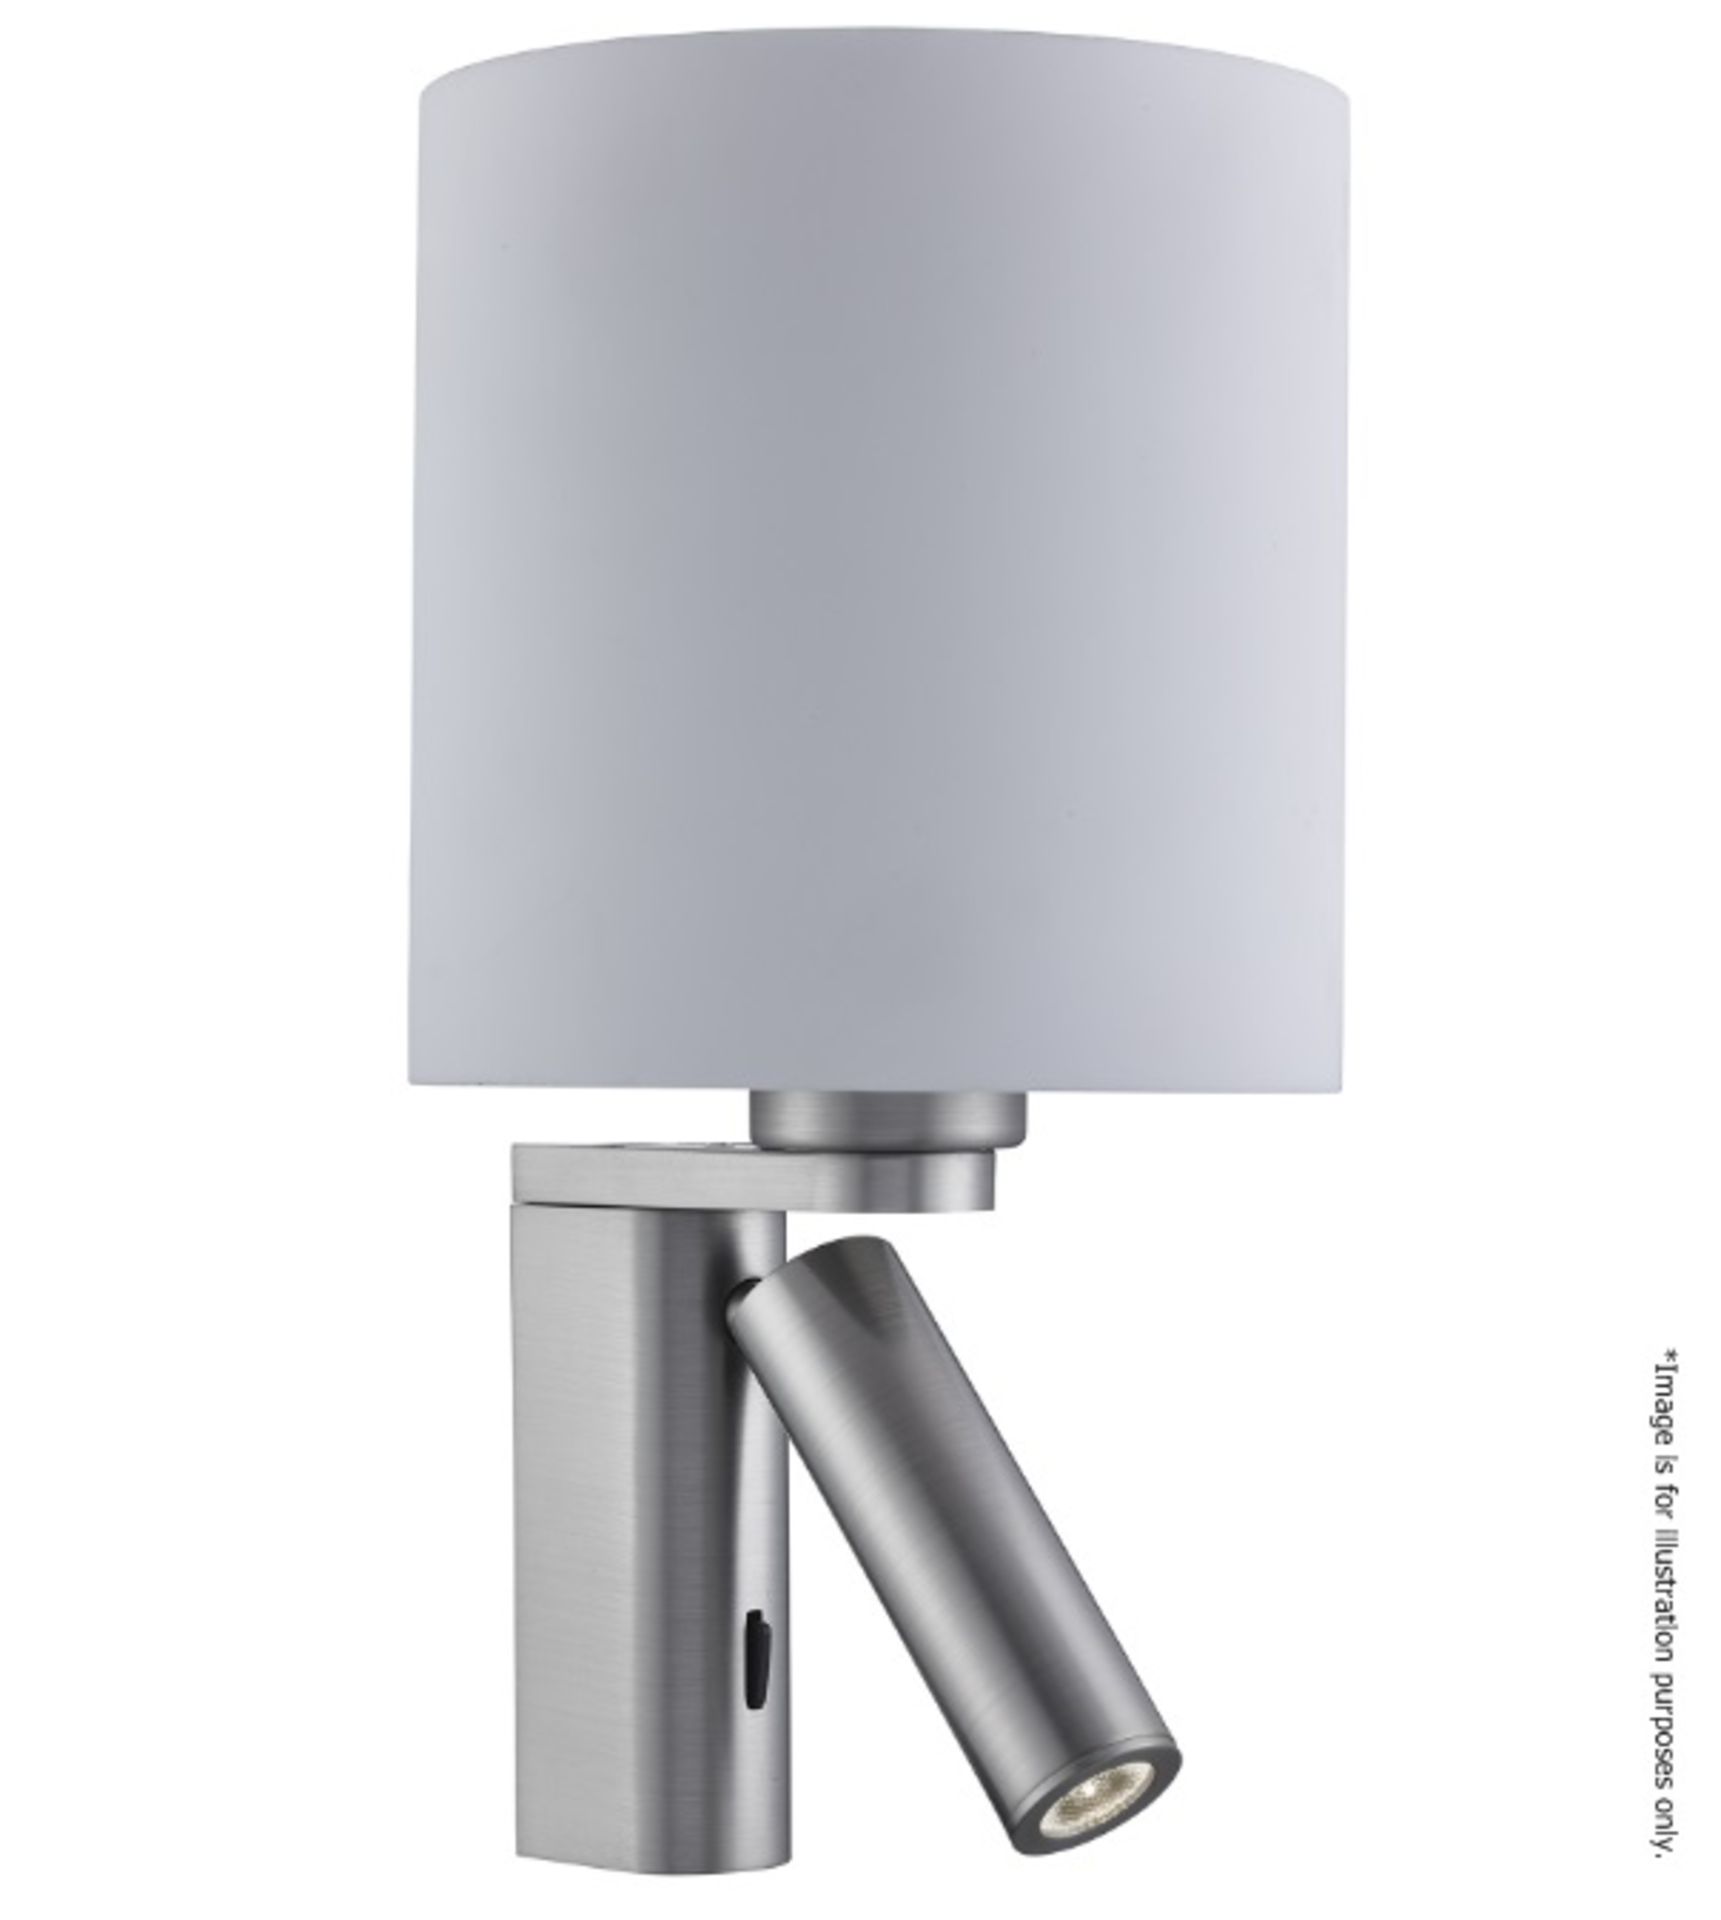 1 x Satin Silver Wall Light With LED Reading Light - Ex Display Stock - RRP £129.60